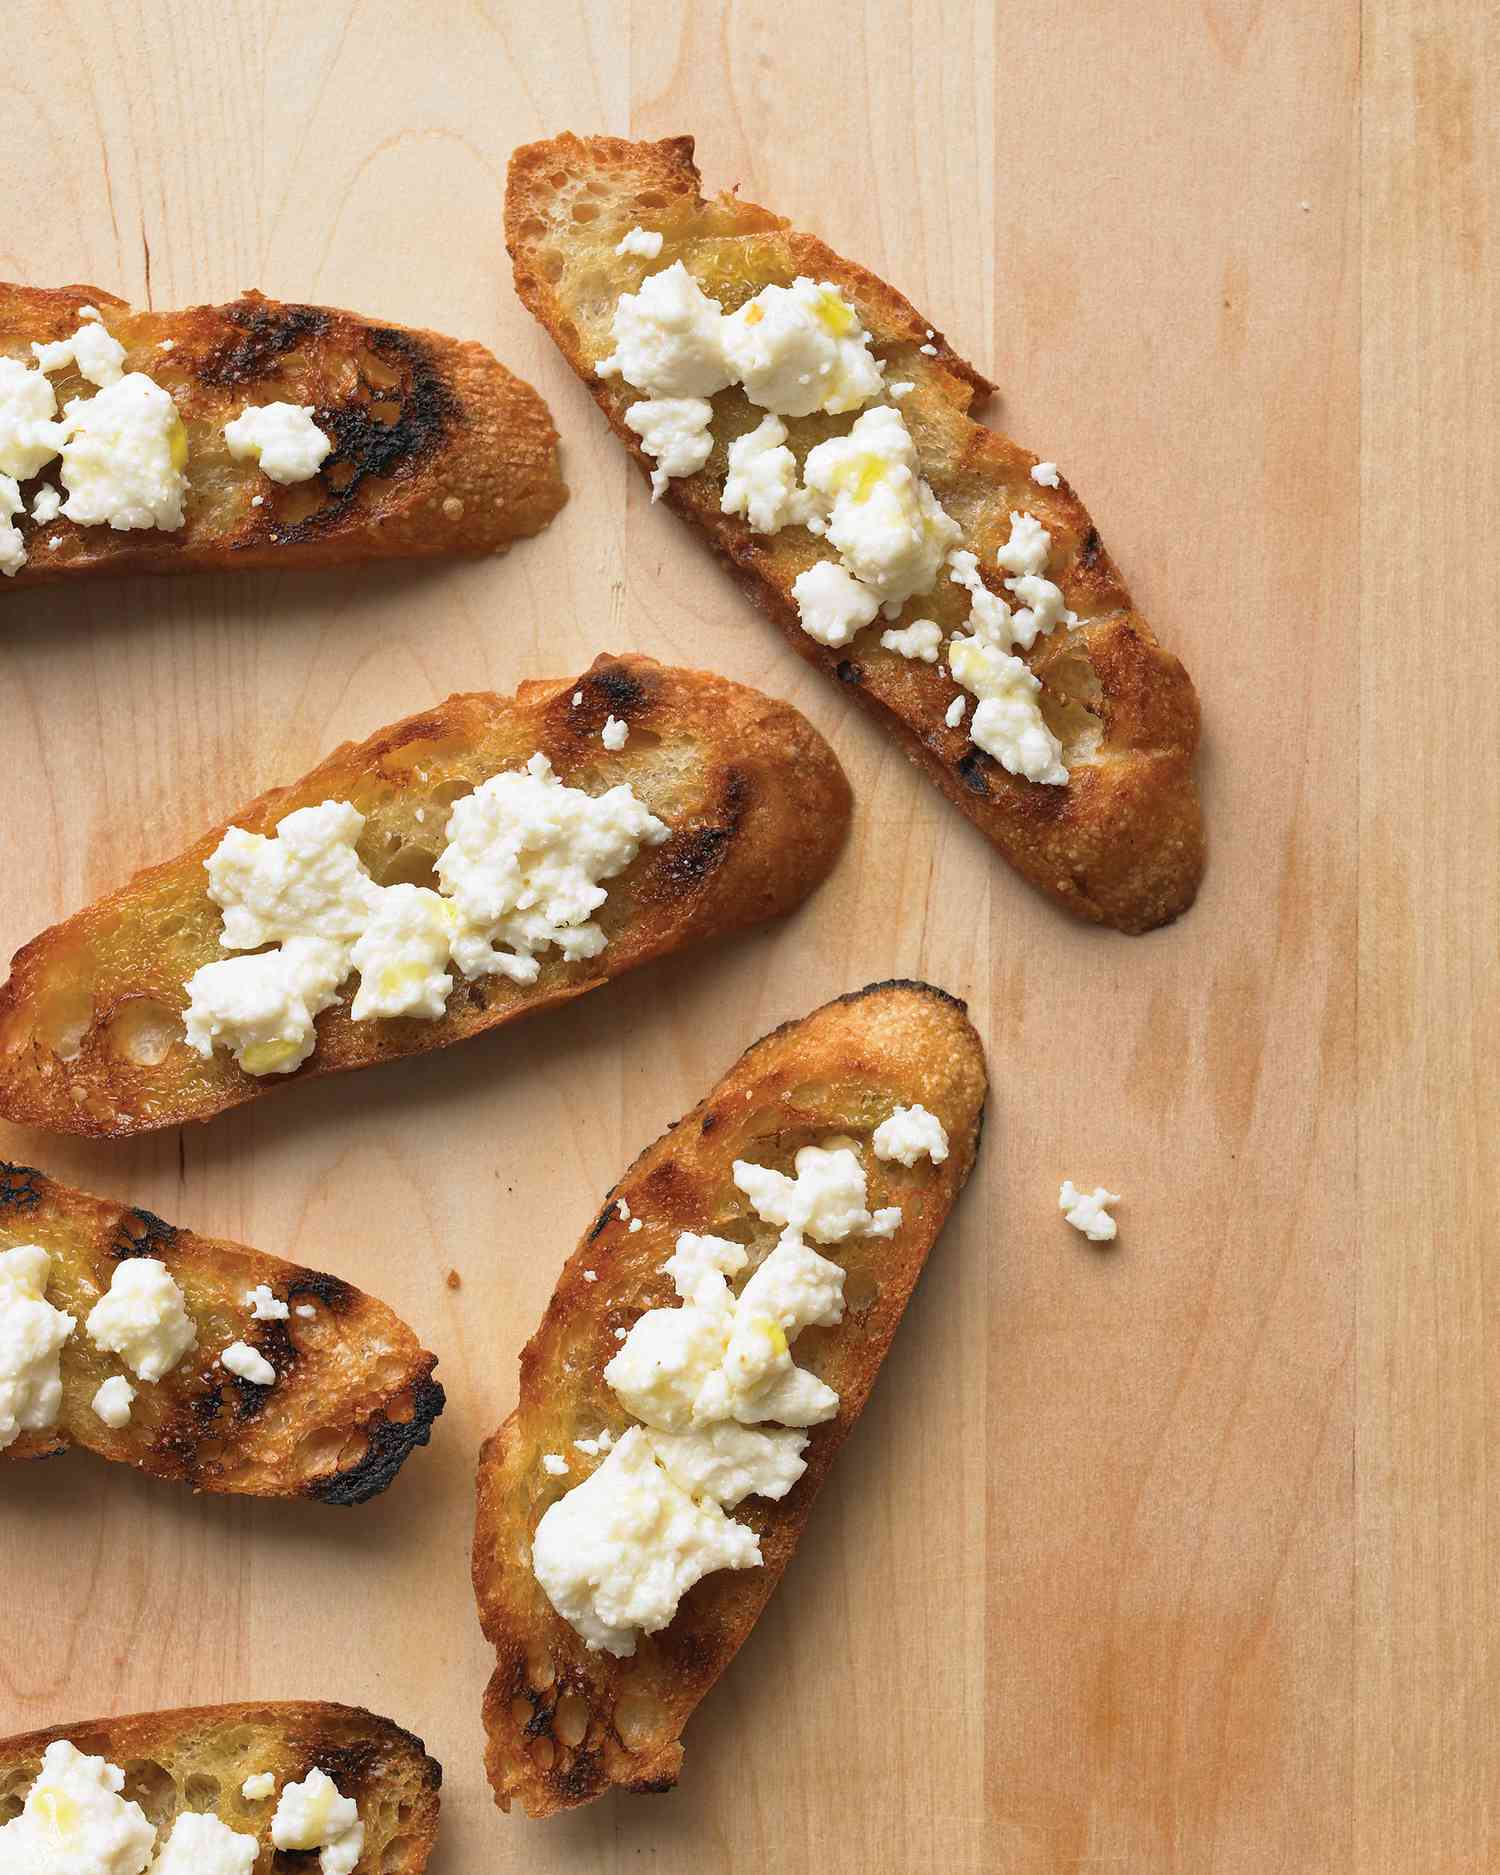 Grilled Bread with Cotija